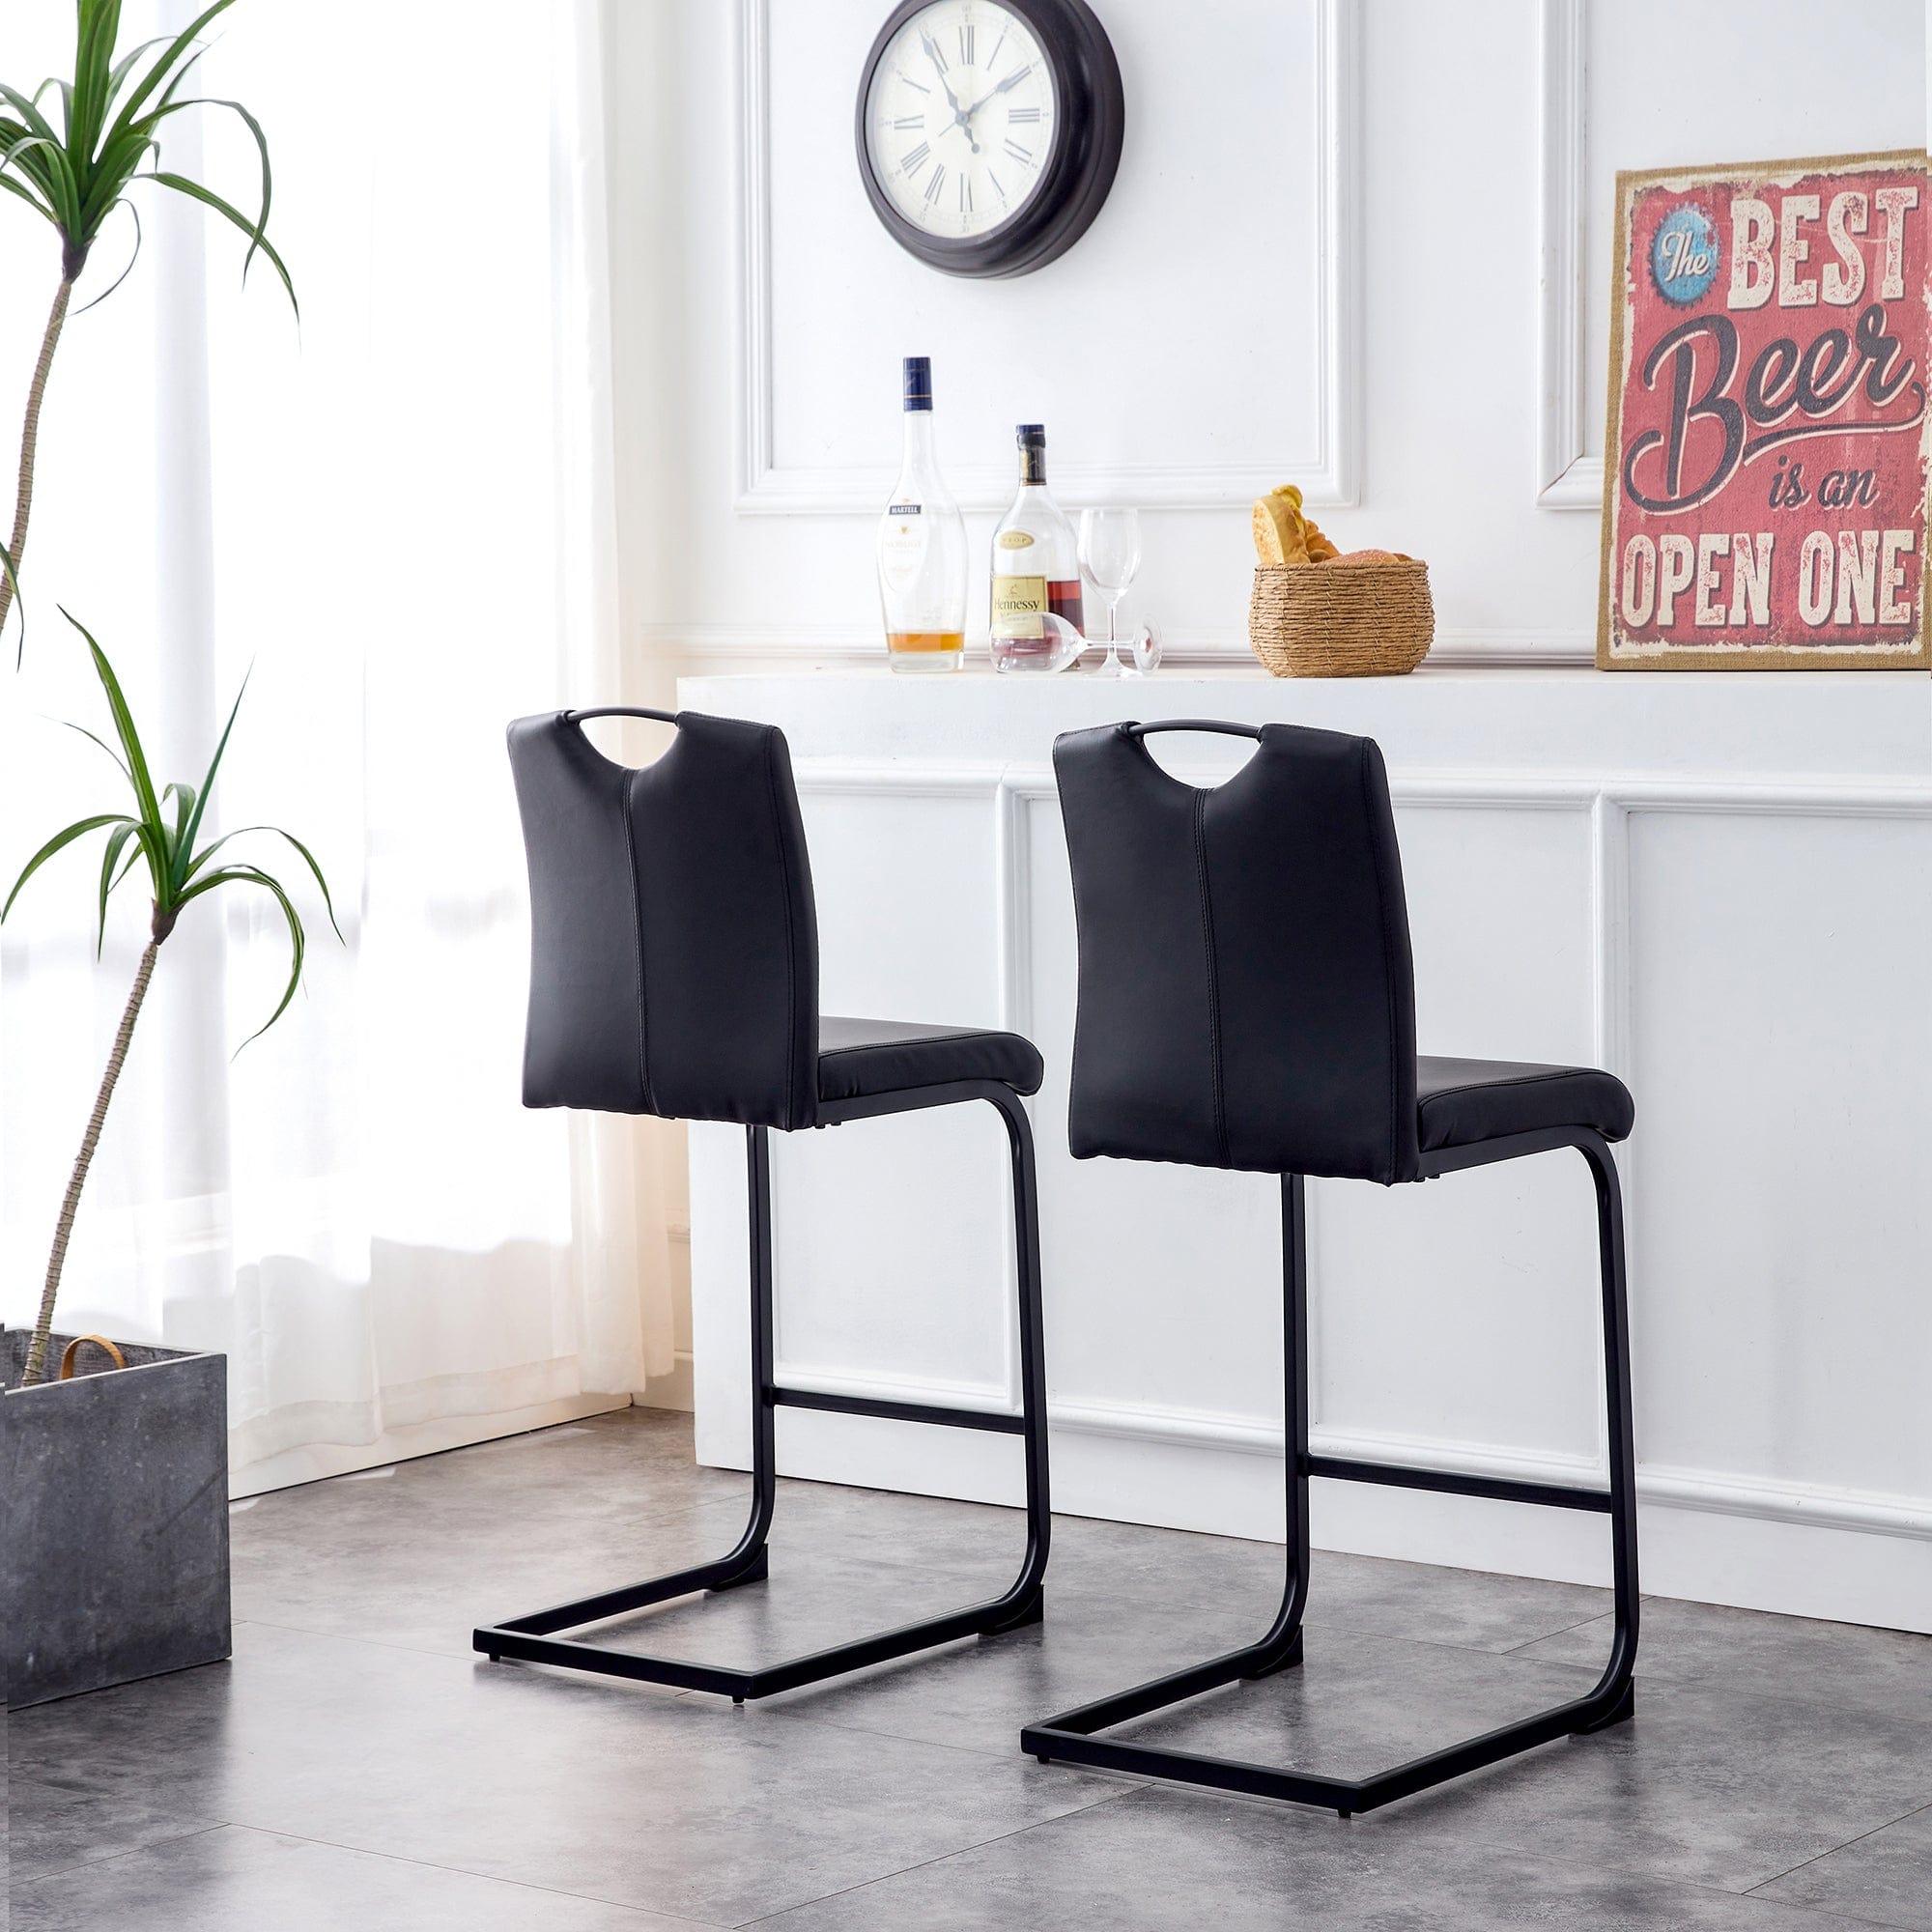 Shop Black PU Chair Barstool Dining Counter Height Chair Set of 2 Mademoiselle Home Decor